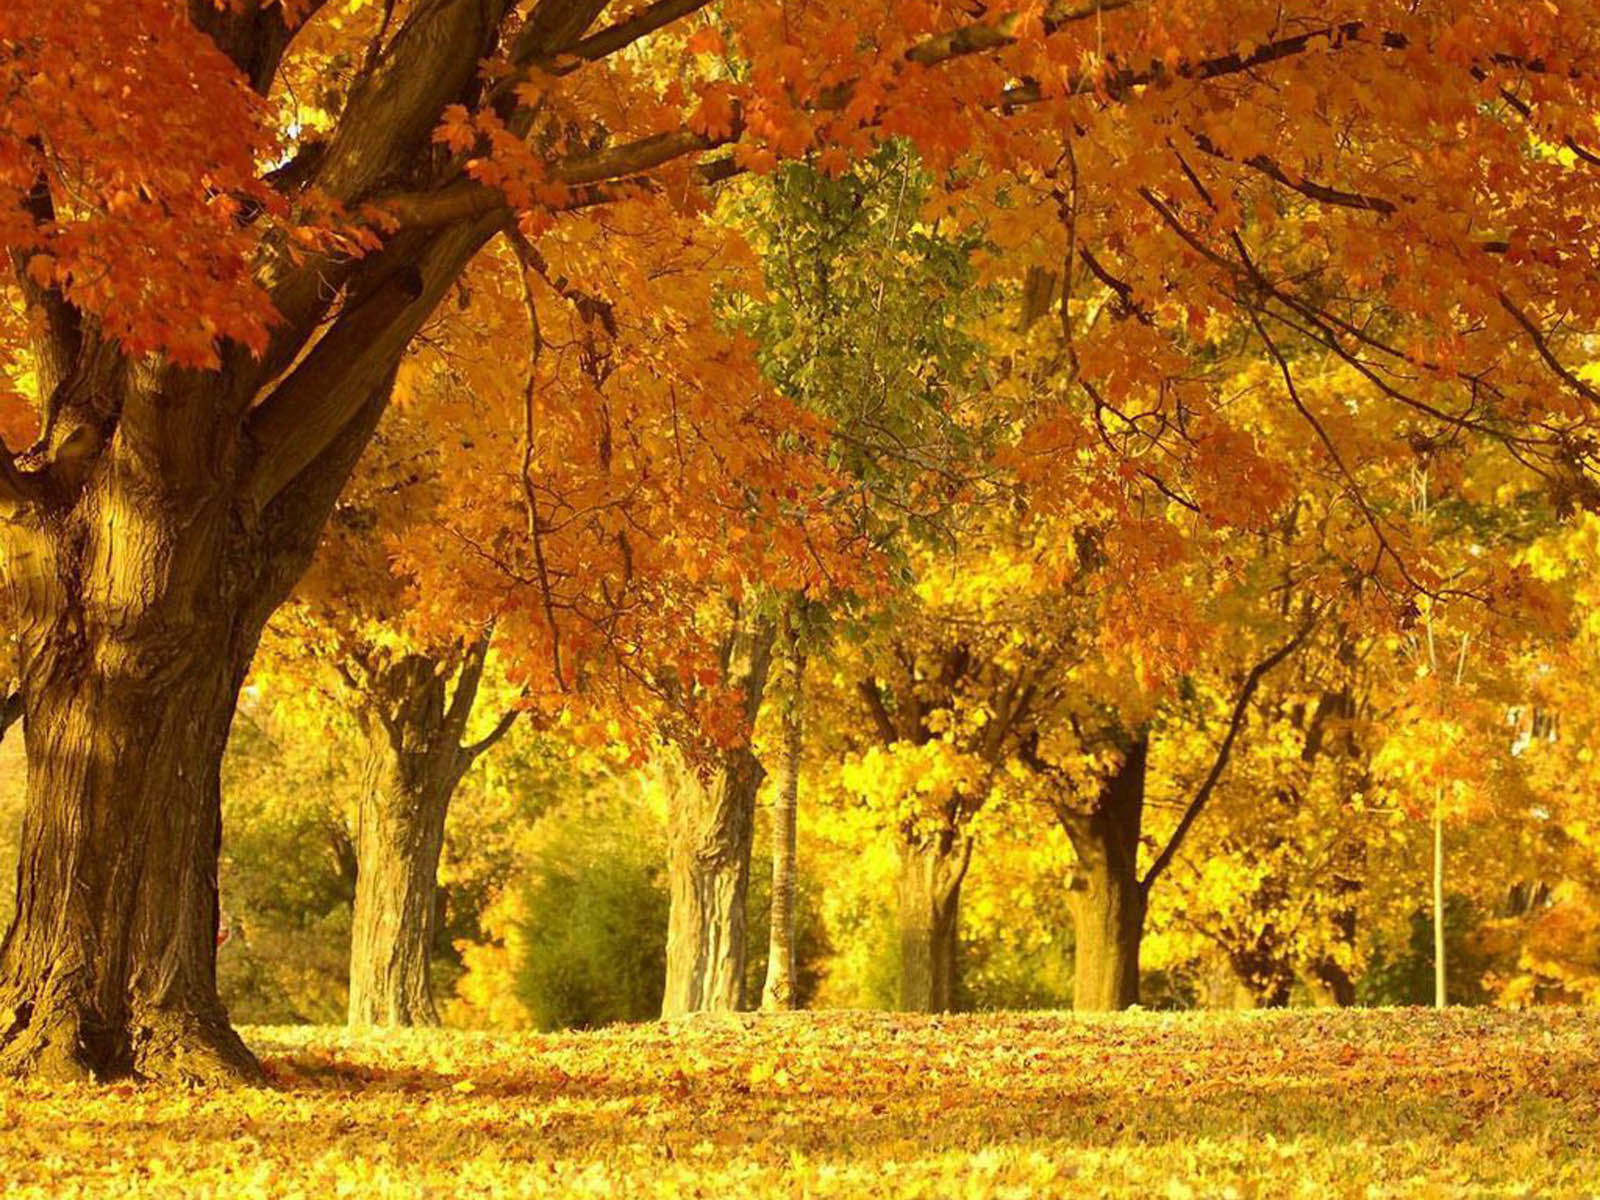 Tag Beautiful Autumn Scenery WallpapersBackgrounds Photos Images